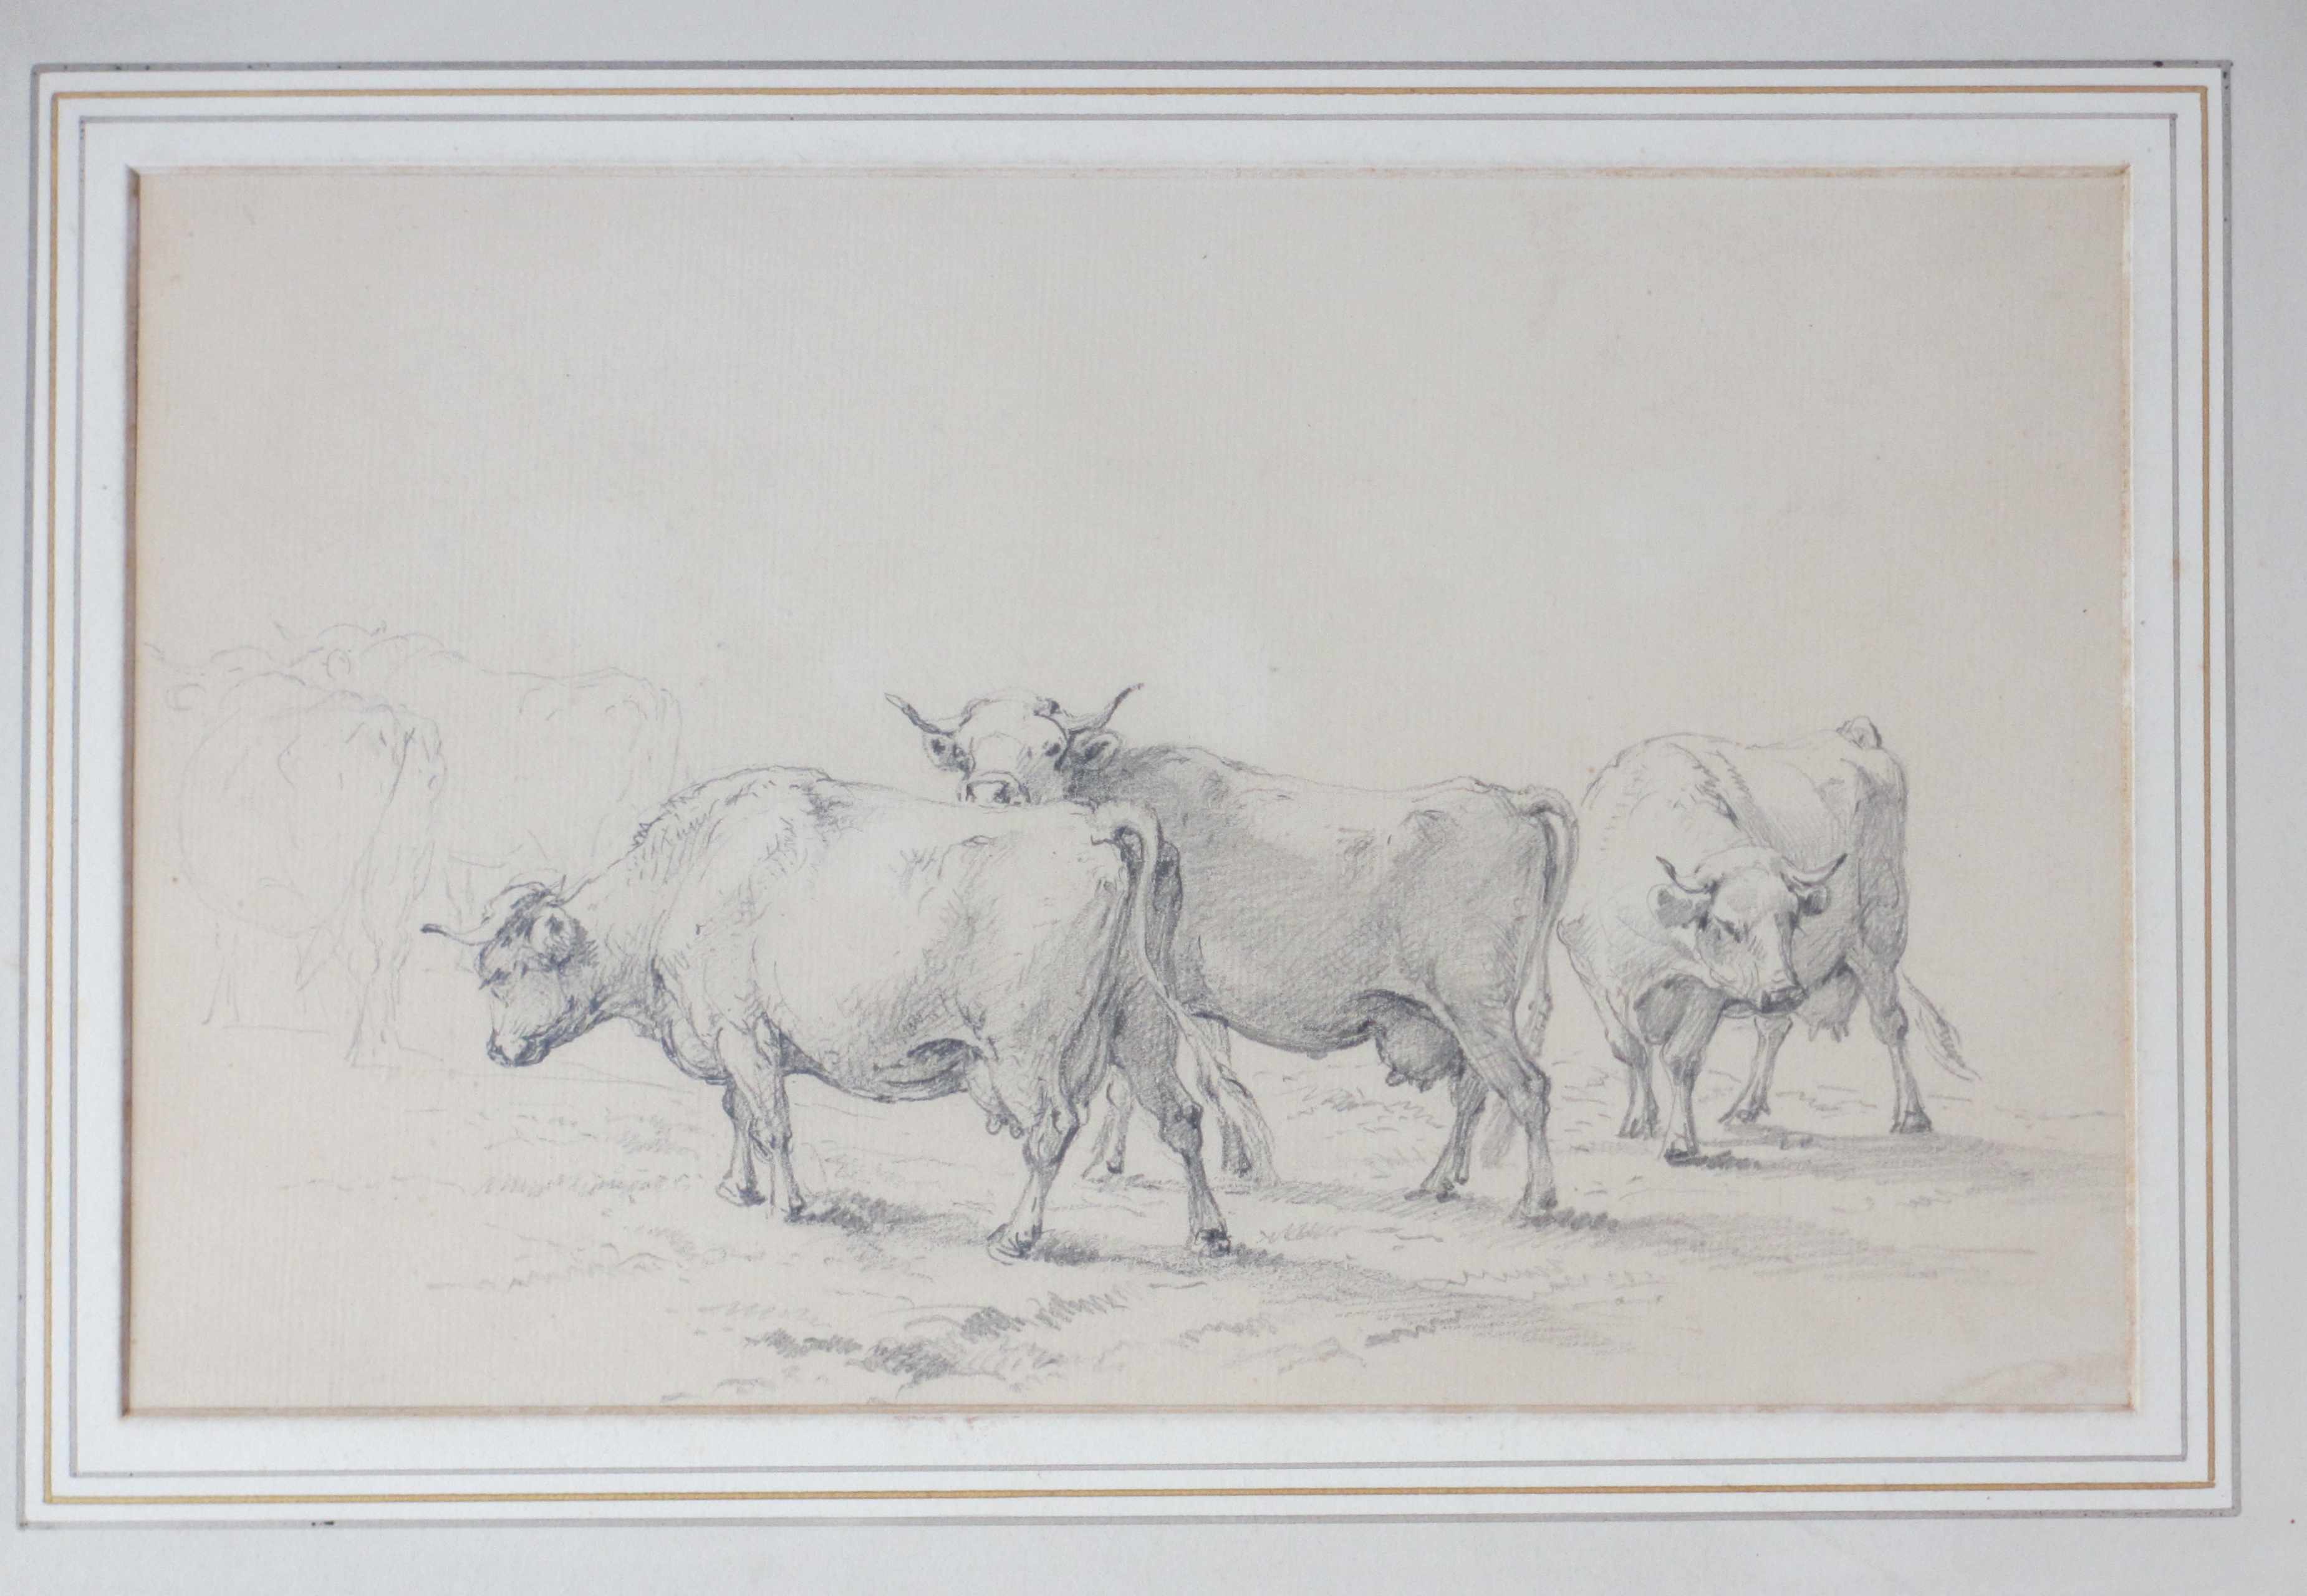 Collections of Drawings antique (10418).jpg